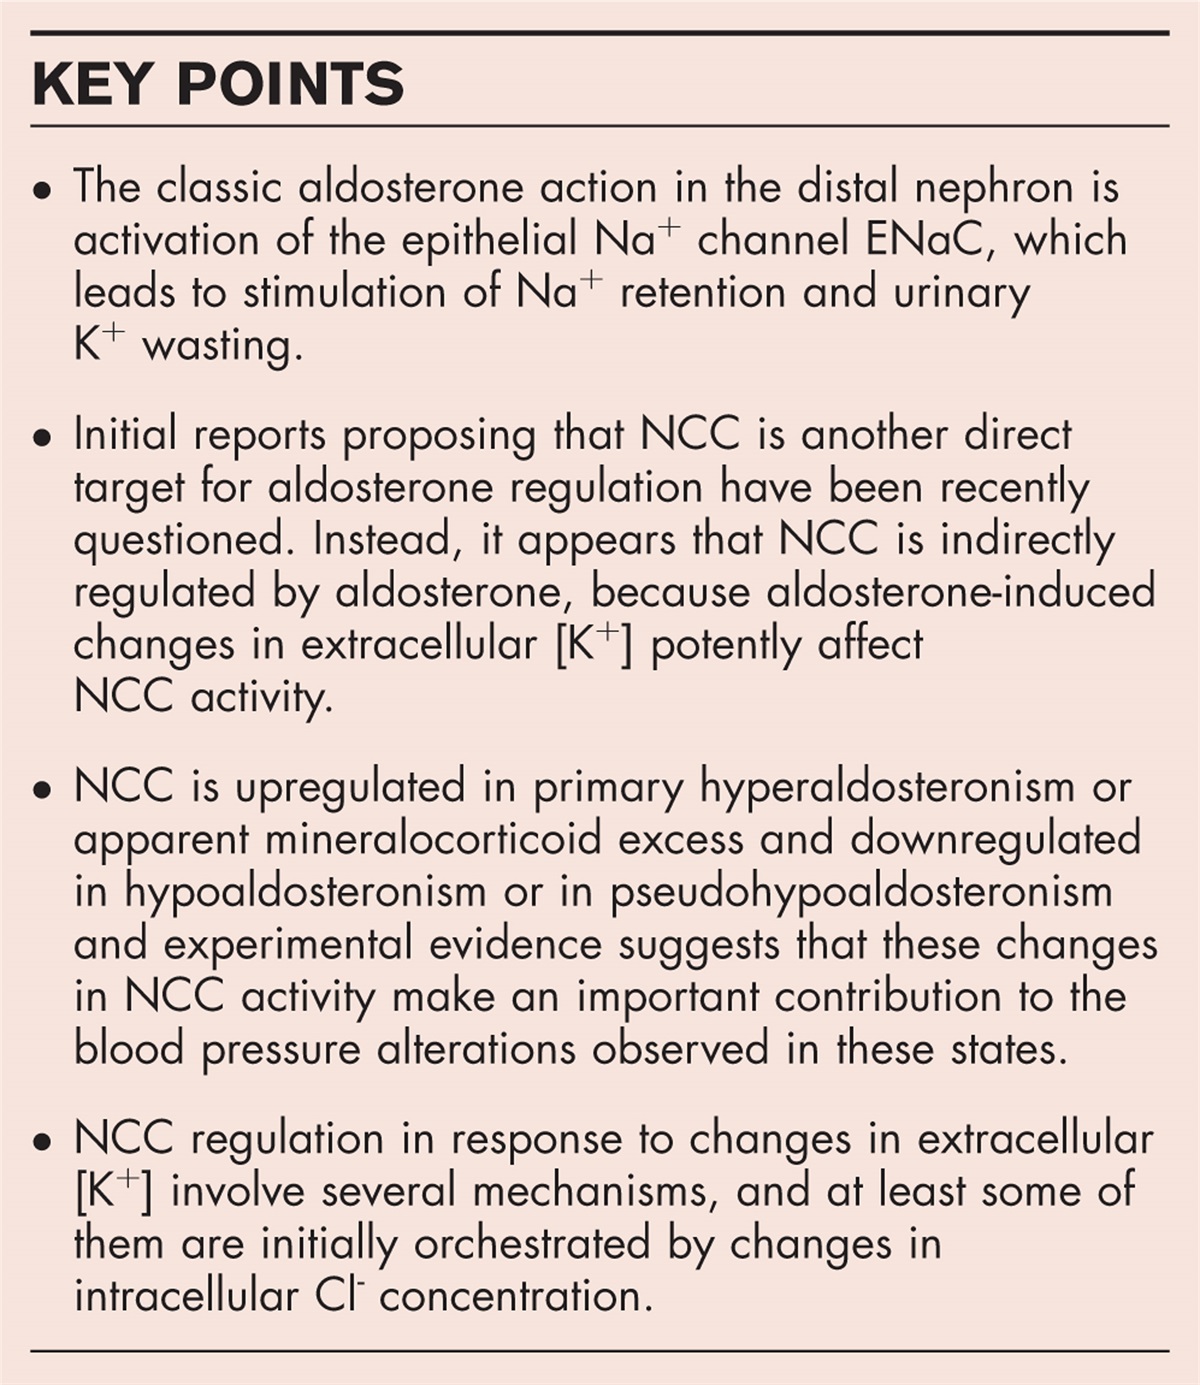 Role of NCC in the pathophysiology of hypertension in primary aldosteronism